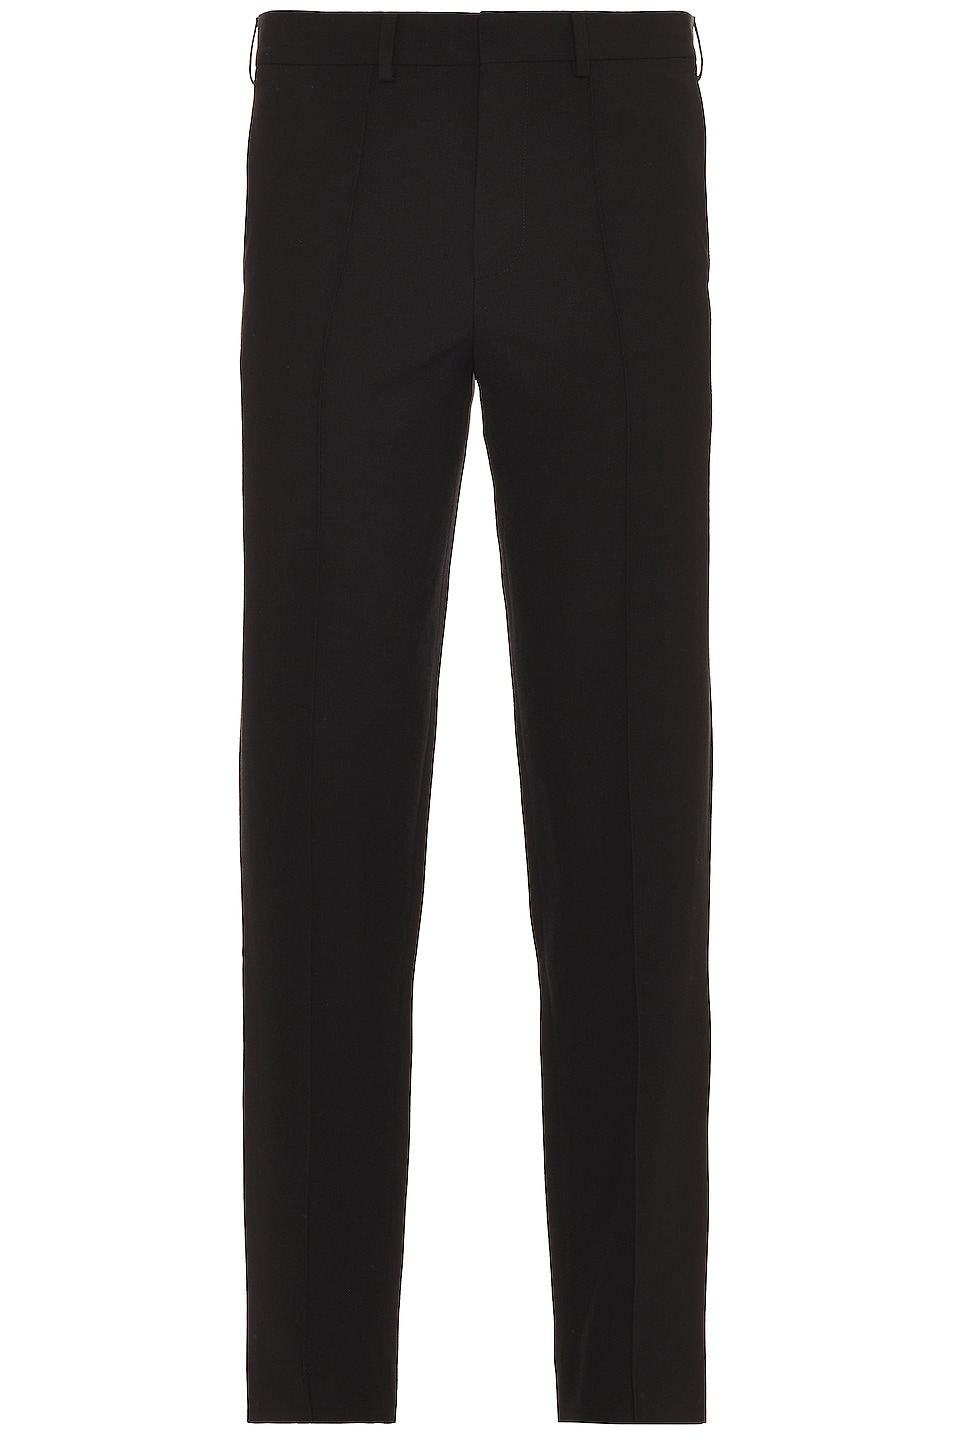 Image 1 of Axel Arigato Supper Straight Wool Trousers in Black